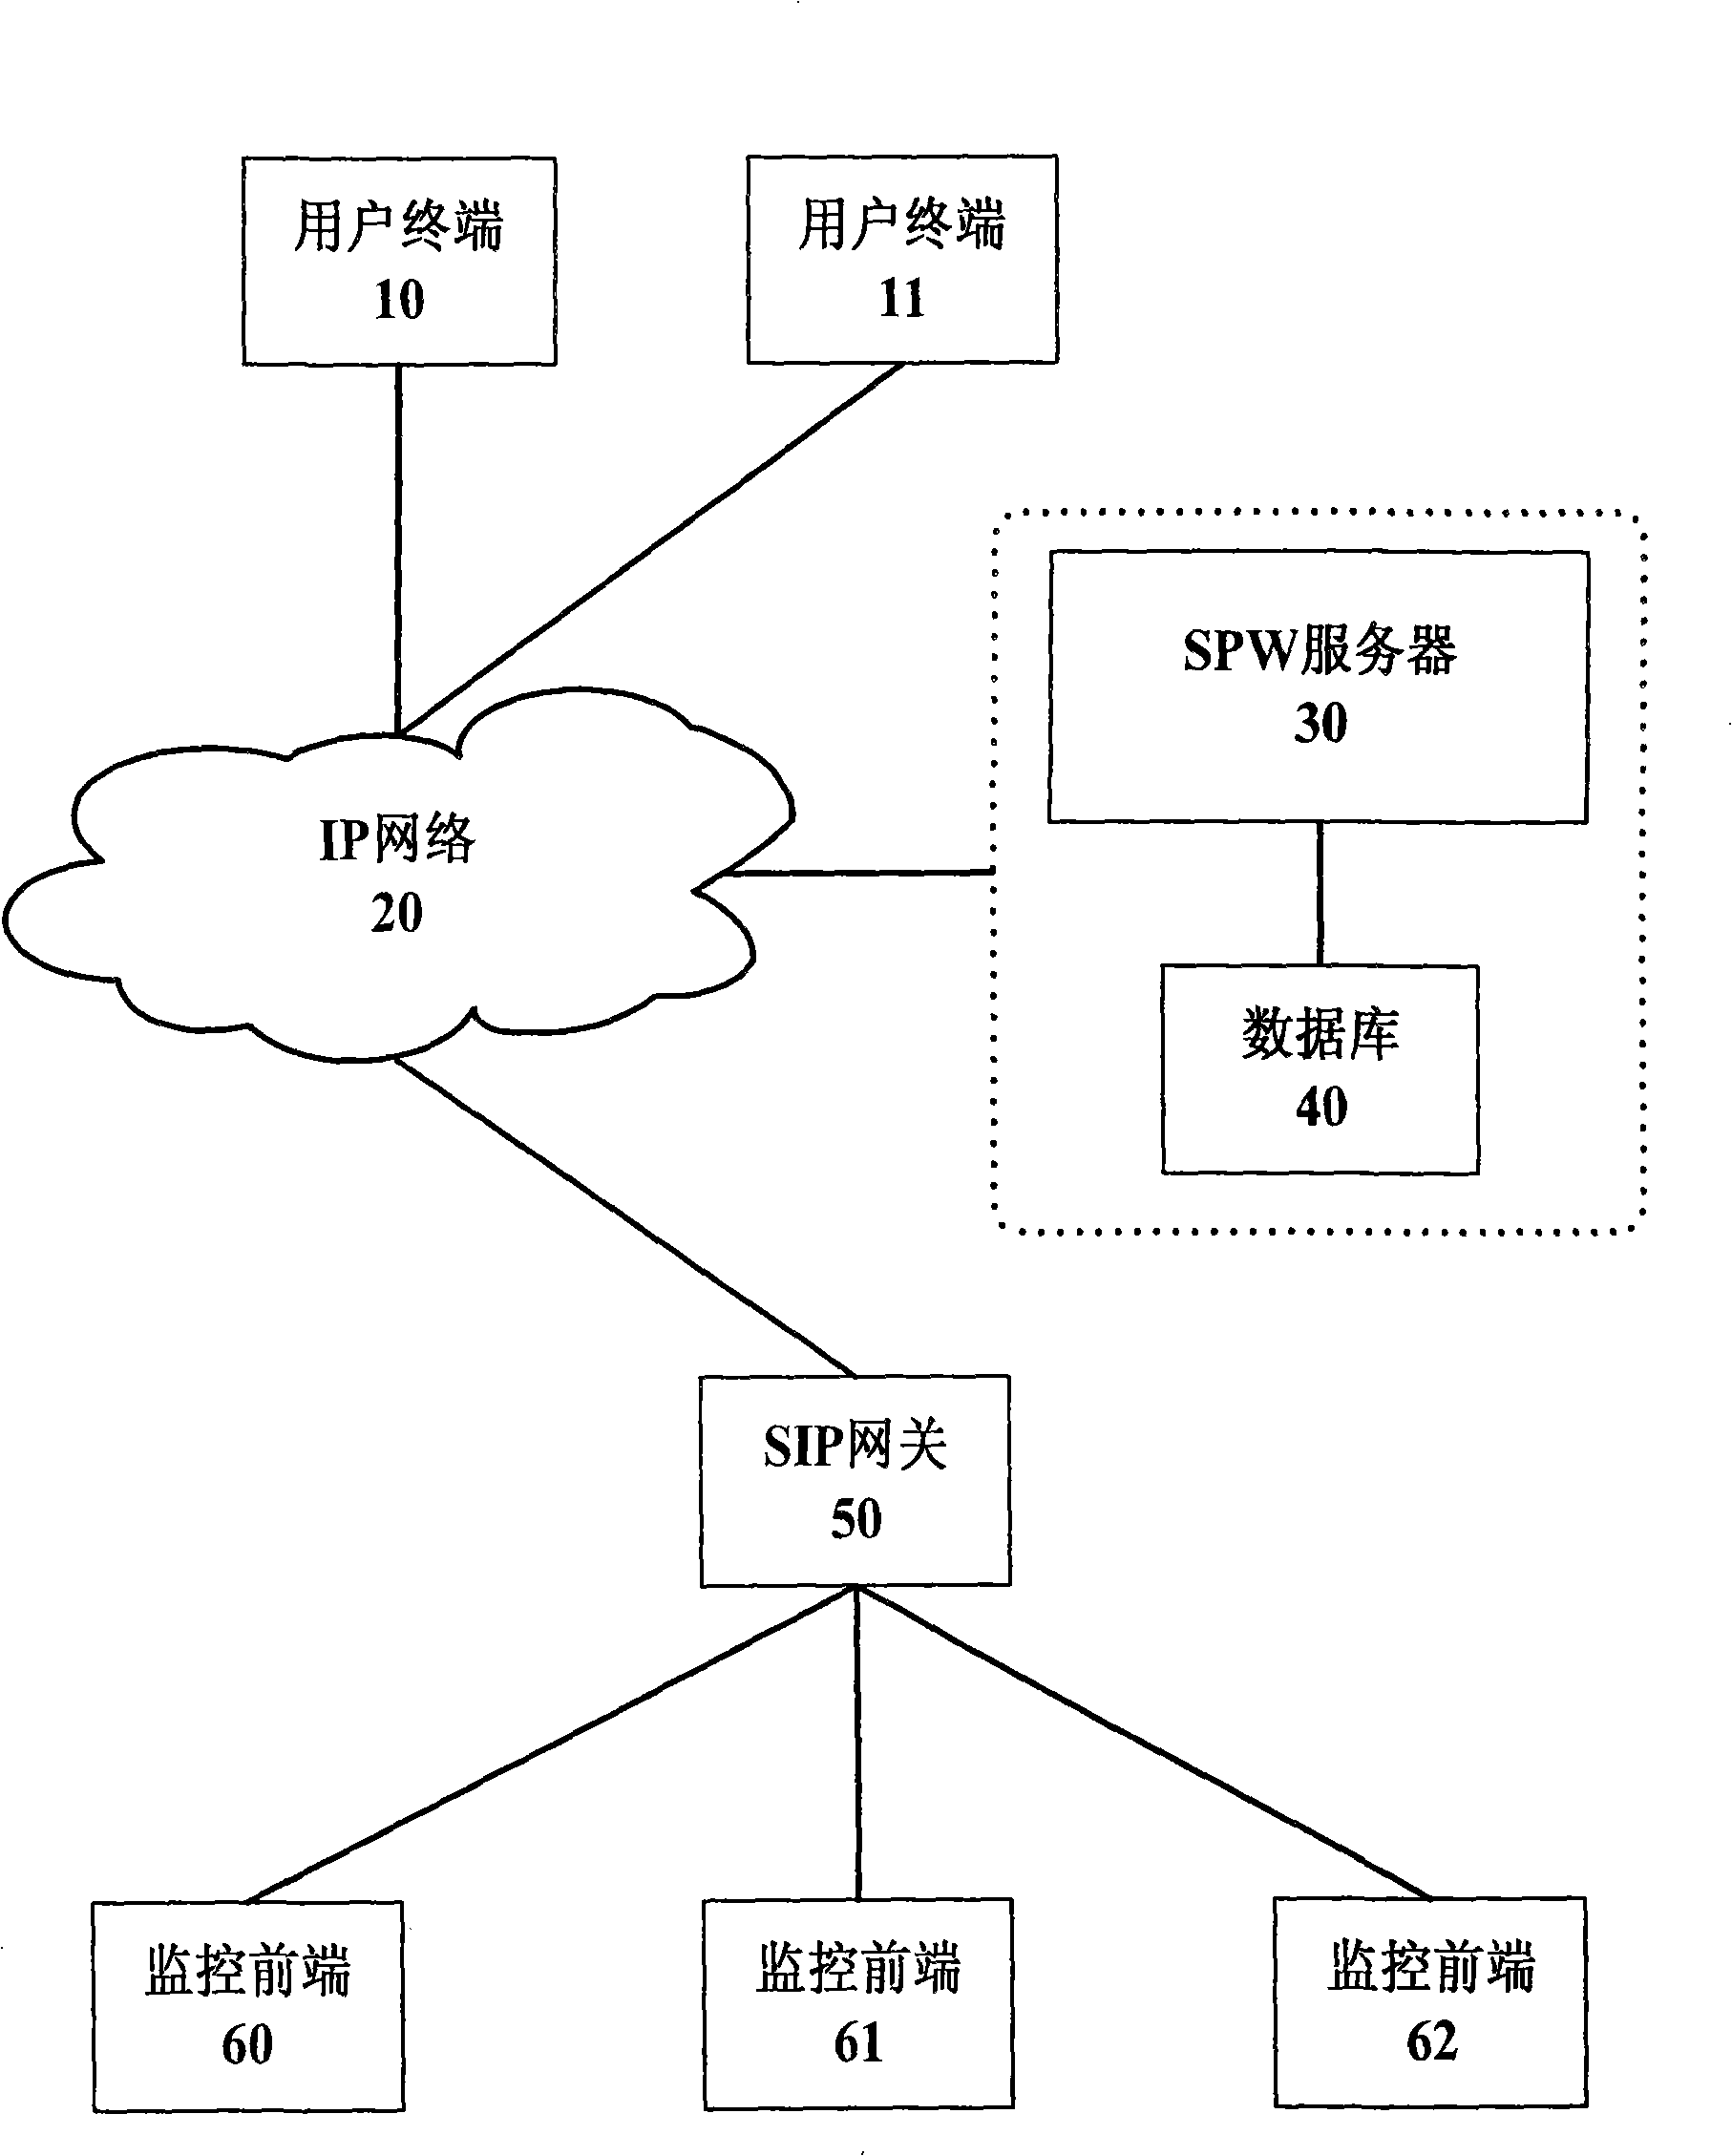 Method for operating front-end equipment using compositive SIP video monitoring system platform